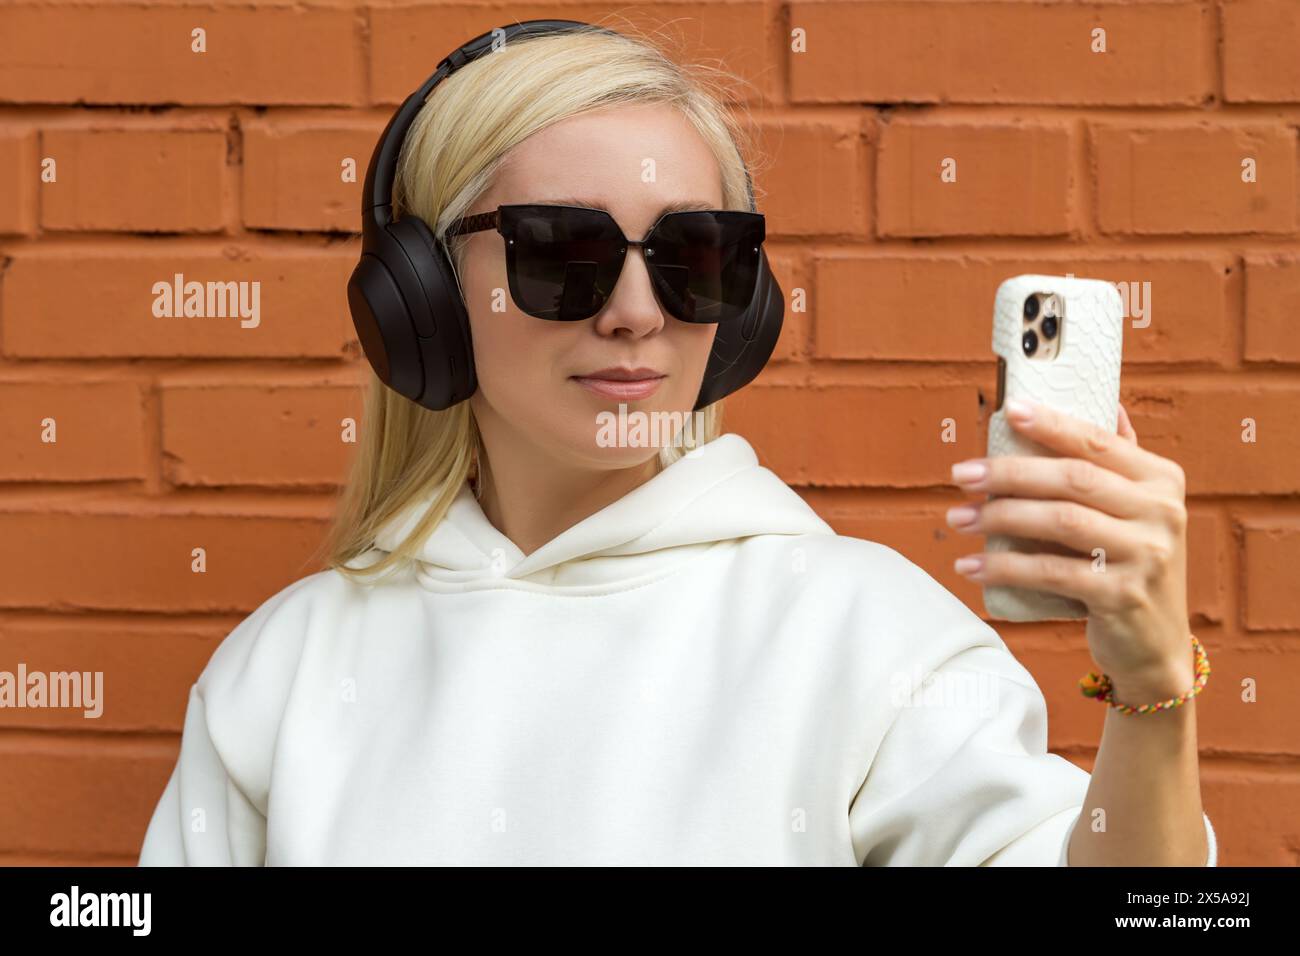 A stylish blonde woman wearing large sunglasses and headphones holds a smartphone, seemingly taking a selfie against a brick wall backdrop. Stock Photo